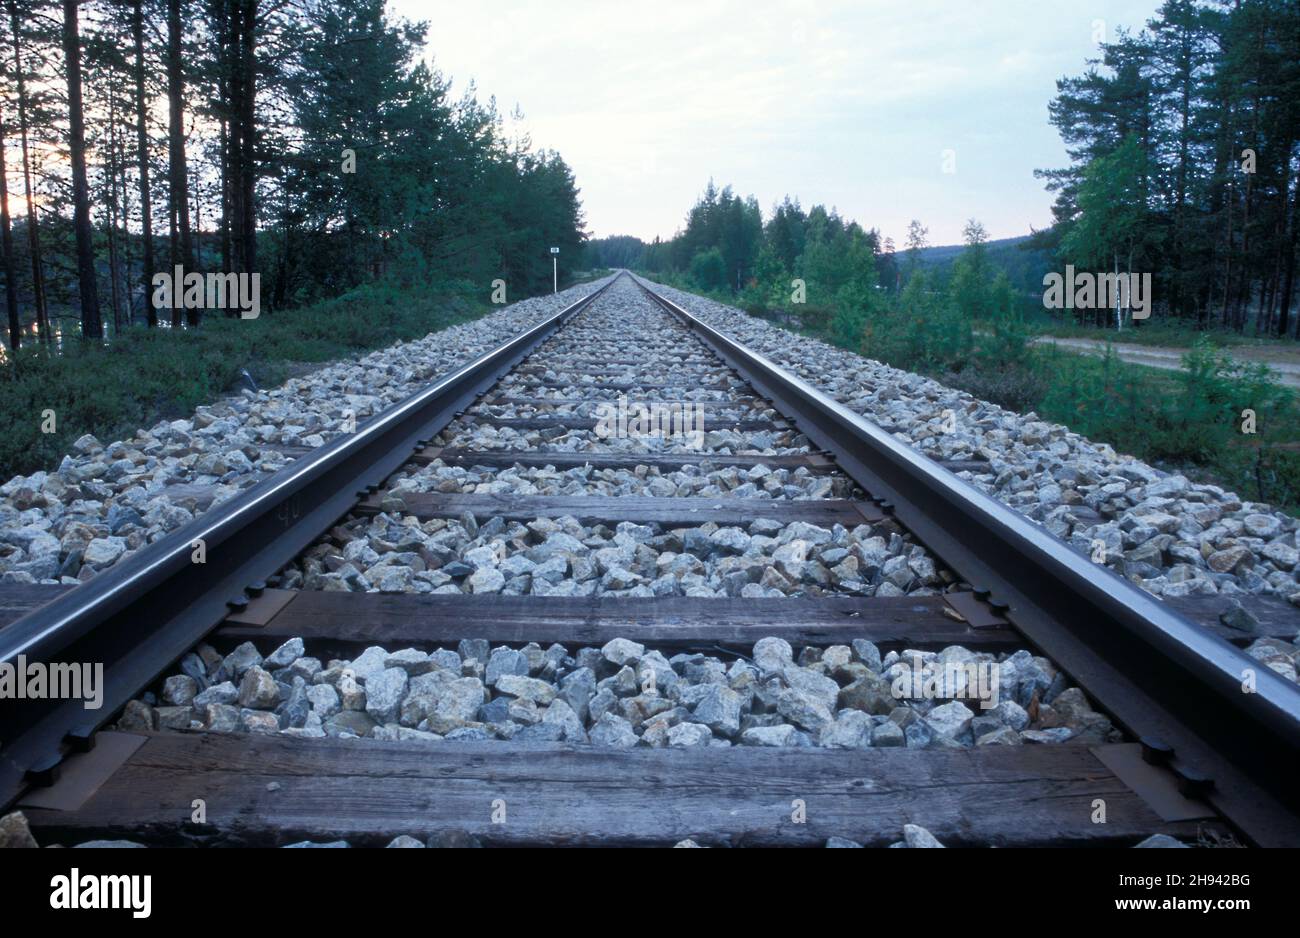 Railway, rails in rural area surrounded by trees and bushes. Gravel road and lake beside. Stock Photo